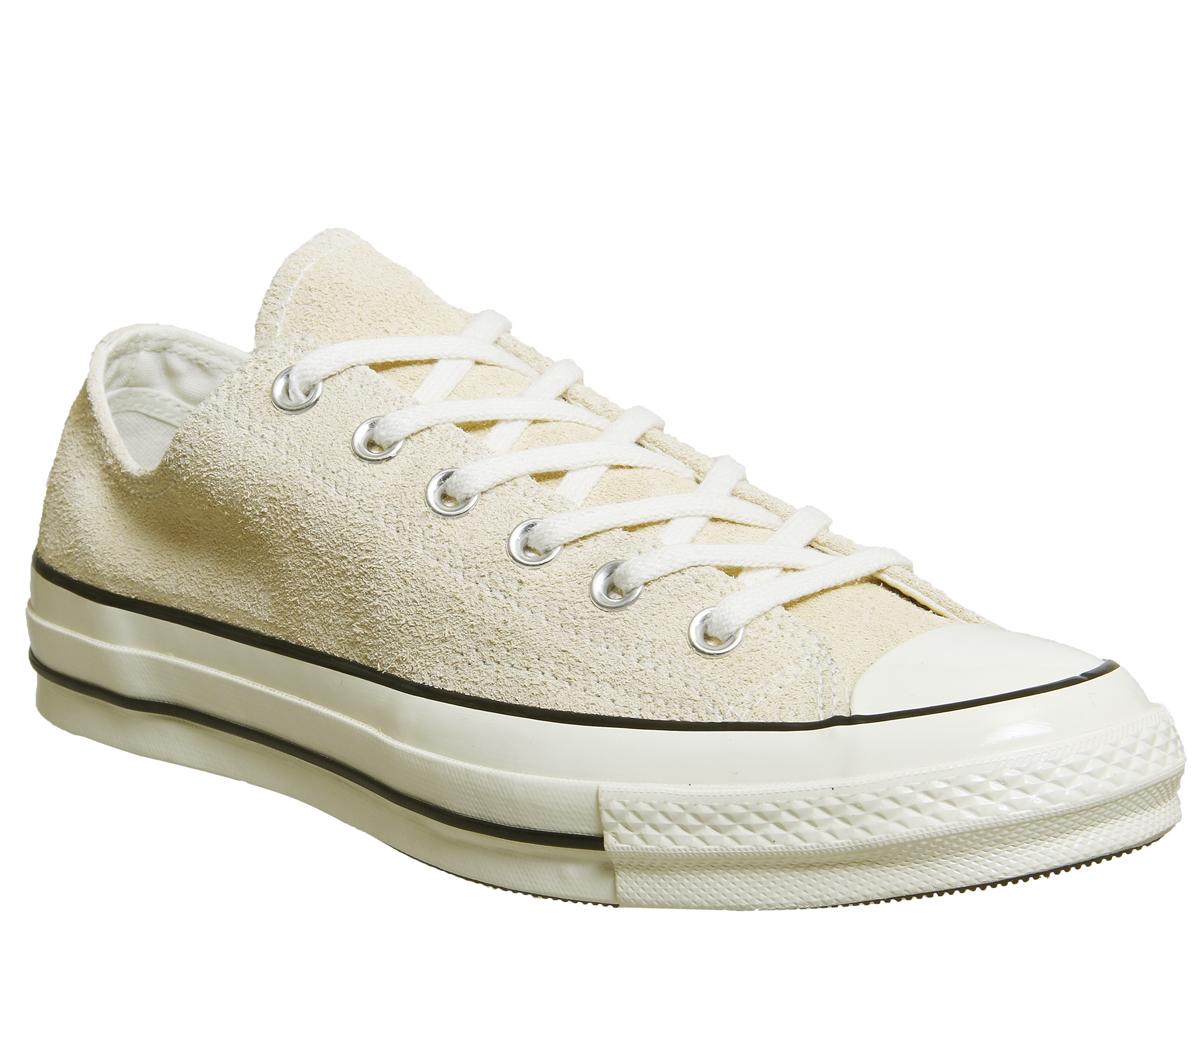 converse all star light ox trainers